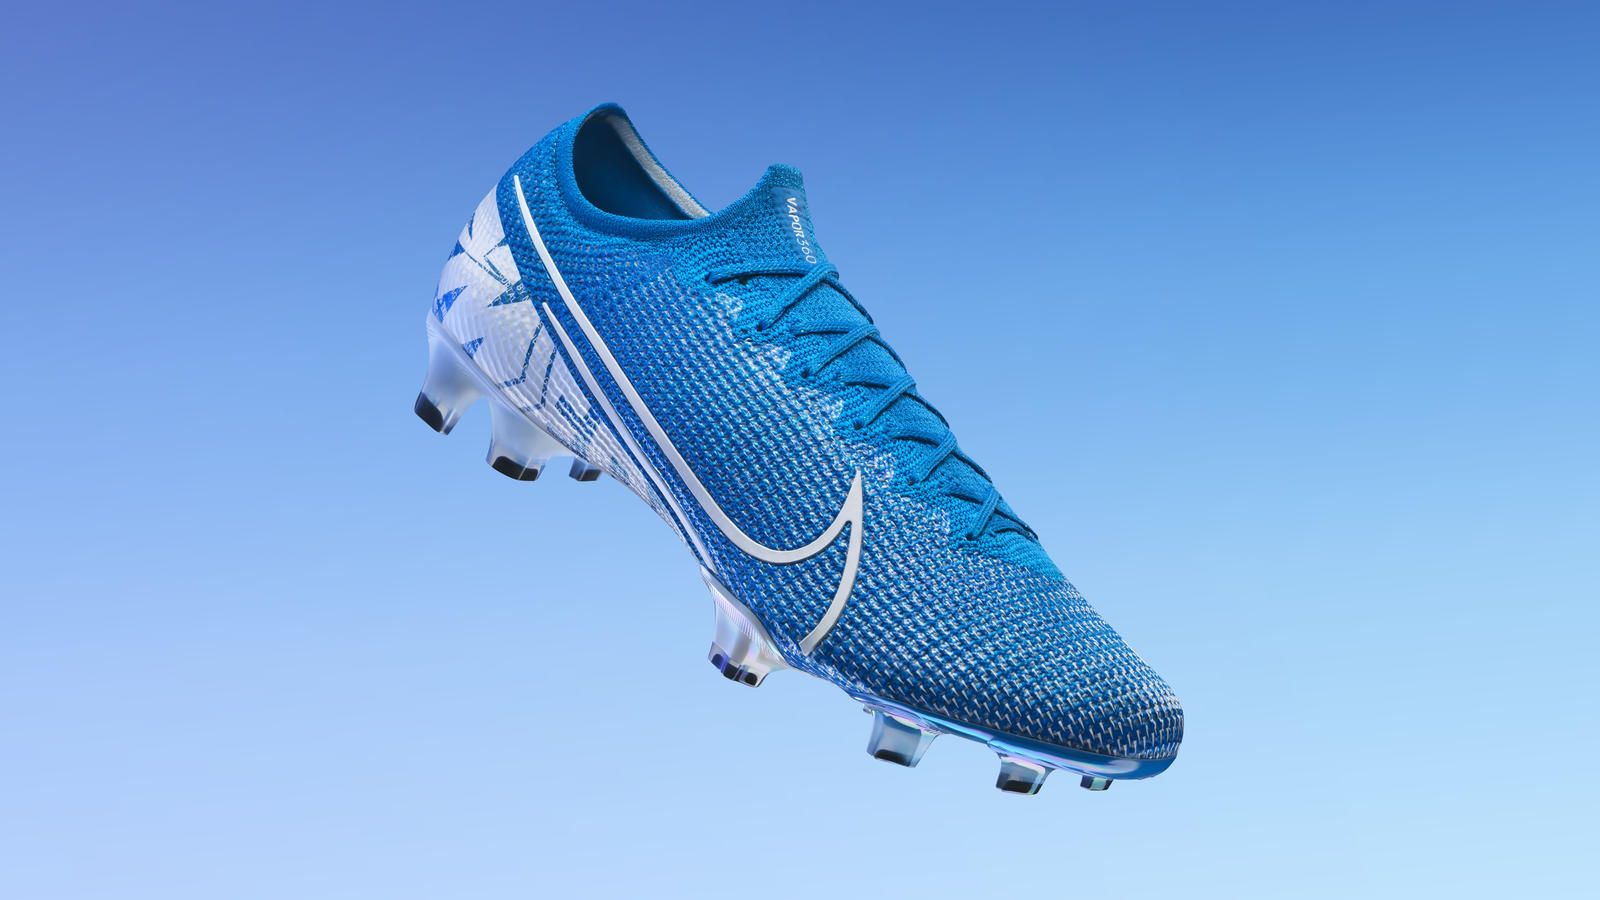 Mercurial 360 Official Image and Release Date